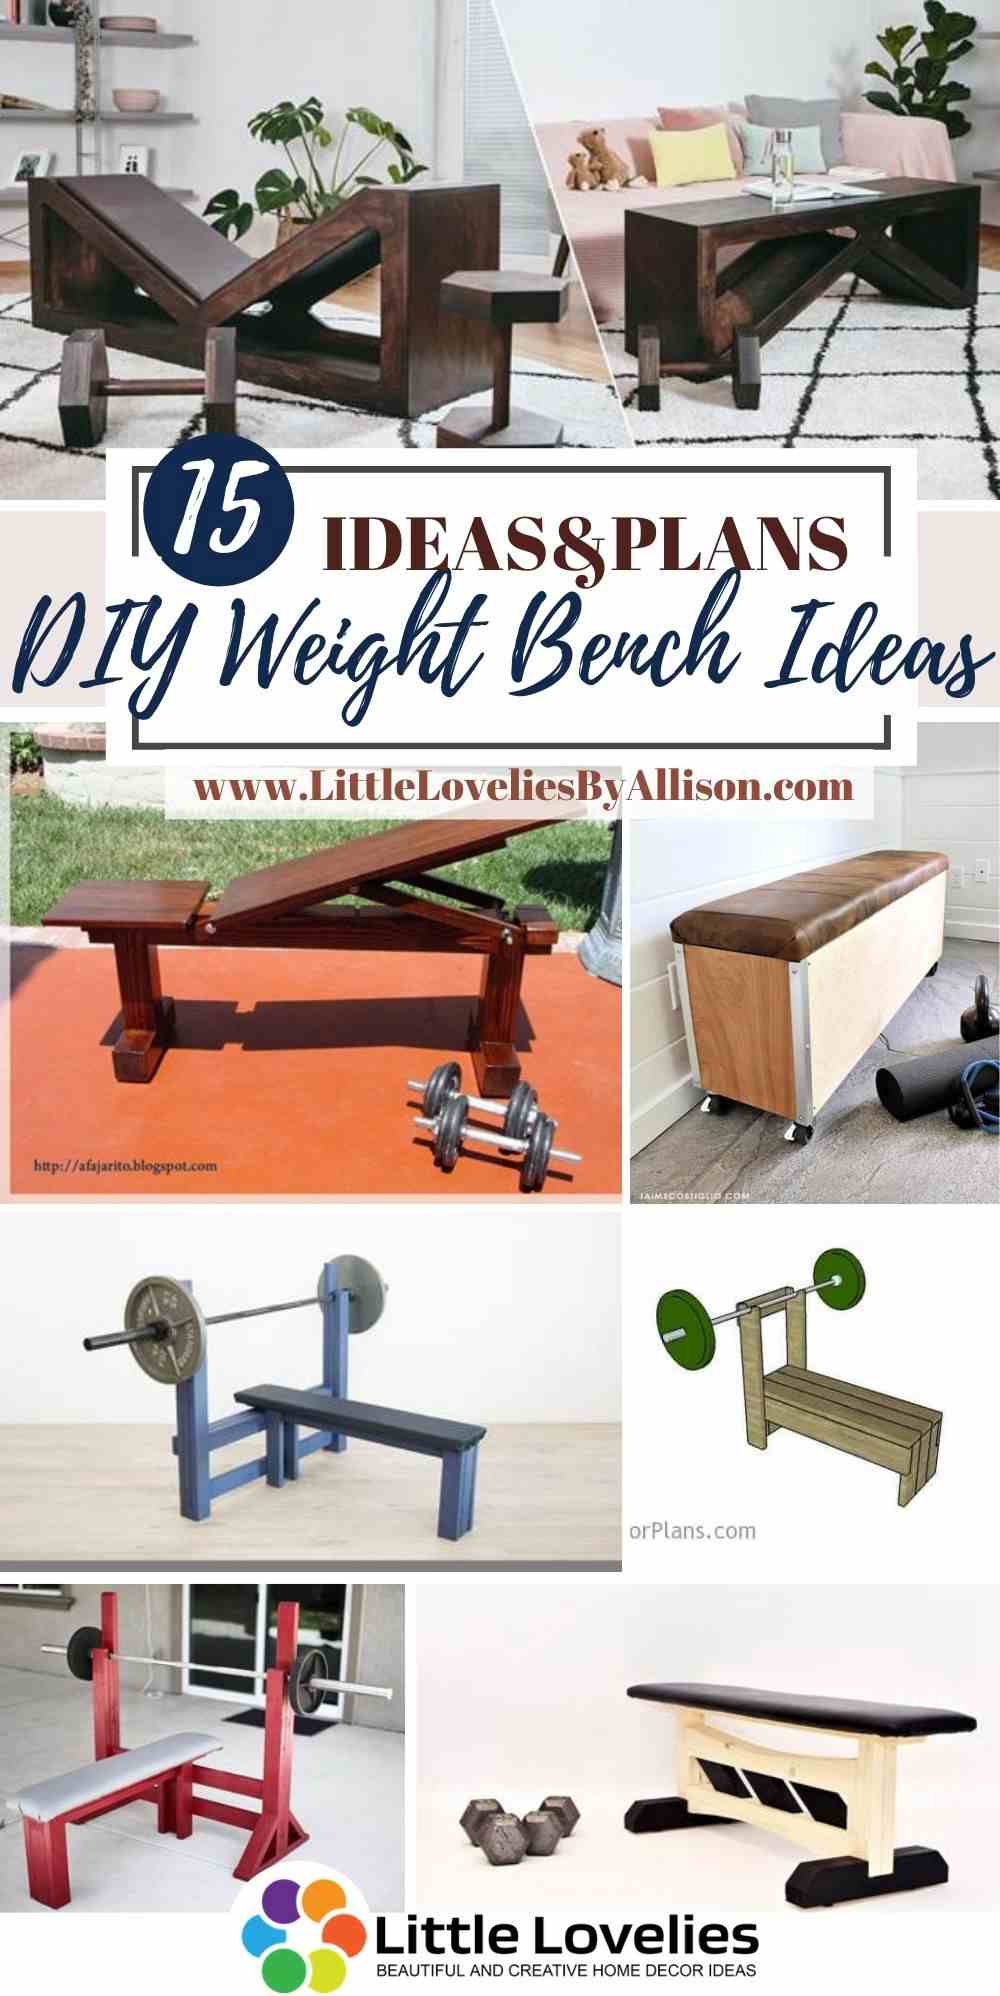 15 Diy Weight Bench Plans You Can Build Easily - Diy Weight Bench Steel